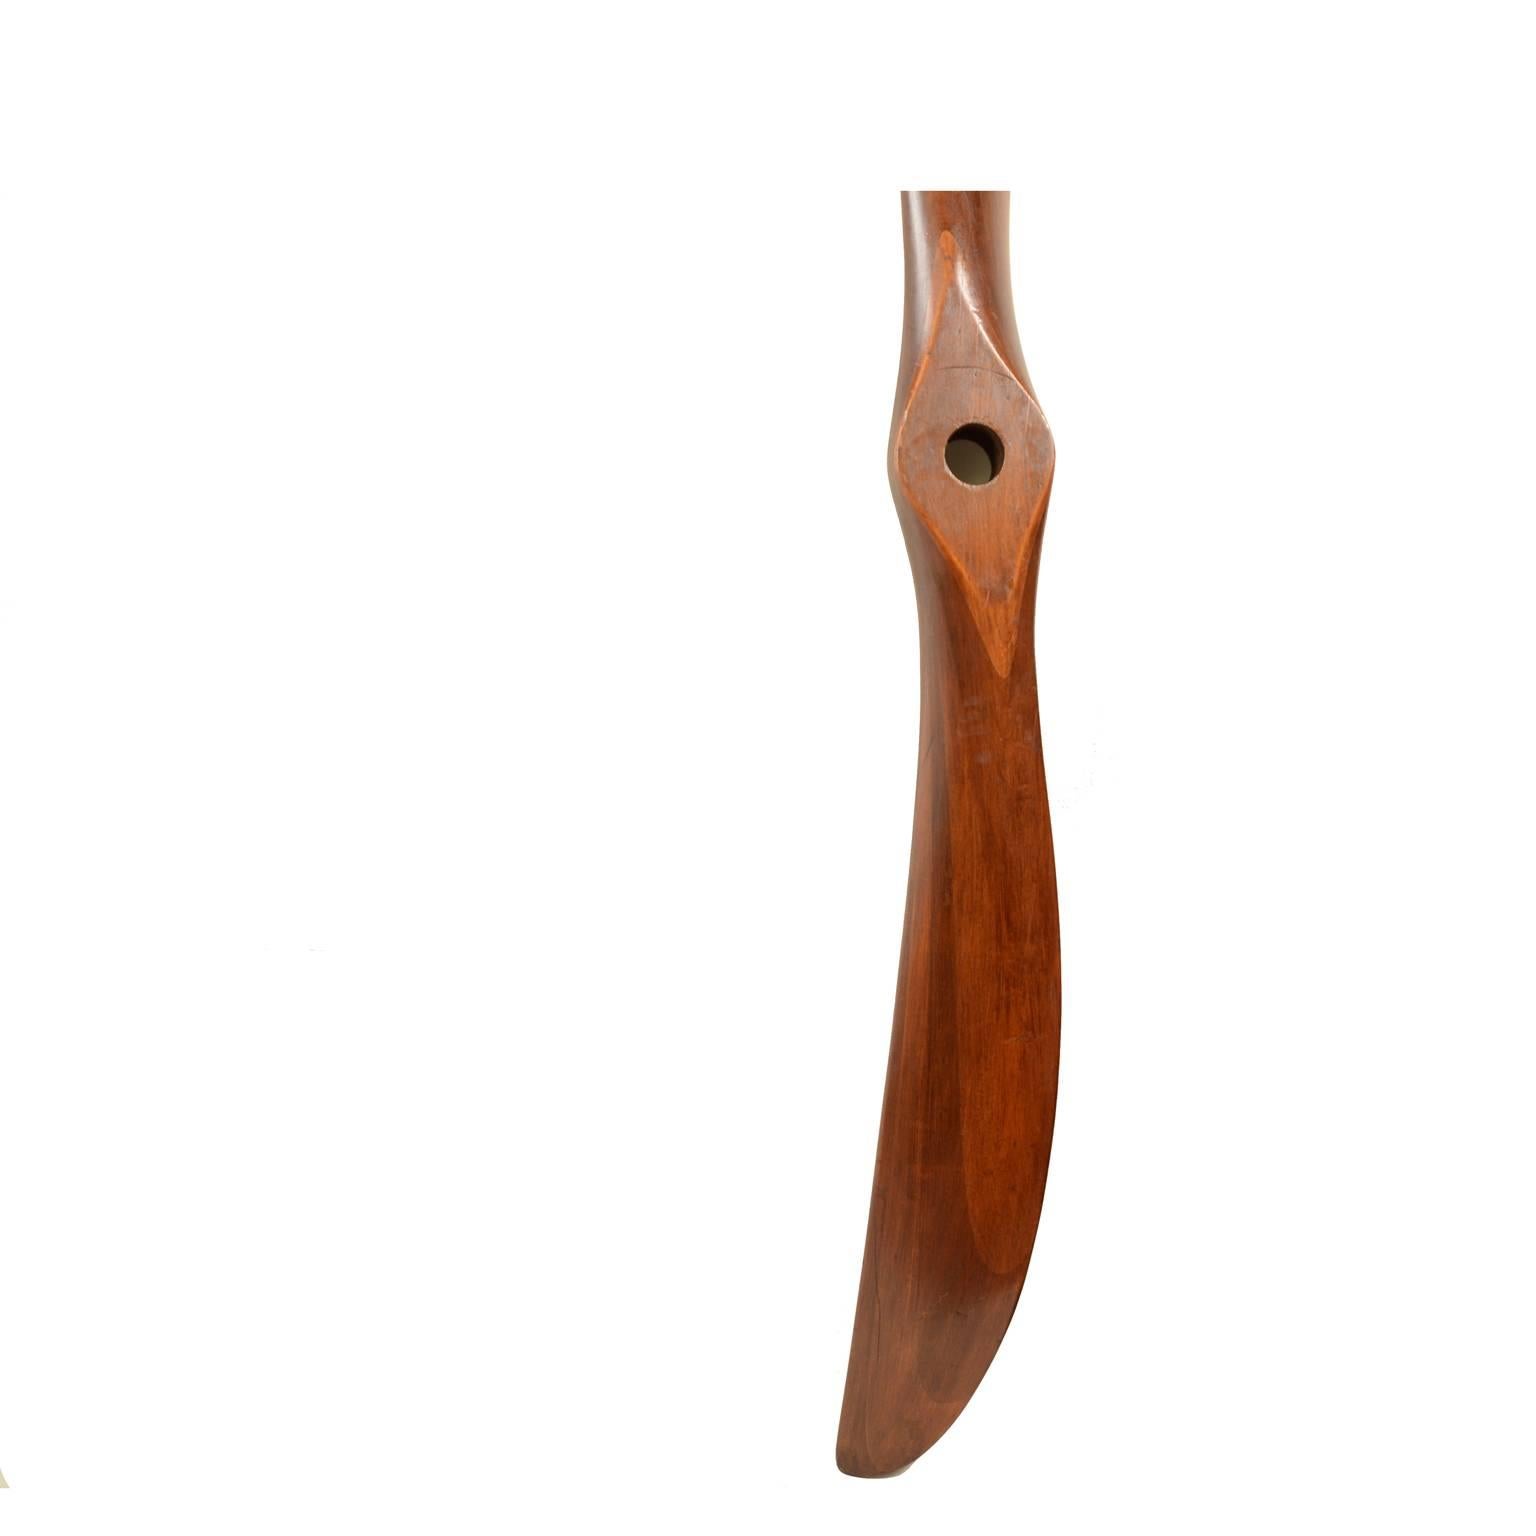 Propeller made of mahogany laminated wood. American manufacture, 1915 circa, serial number *163*. Very good condition, minor repair on the tip. Cm 19x10.5x274 - inches 7.48x4.13x107.8. 
It is a Paragon OX5 propeller, spare and never used, made by